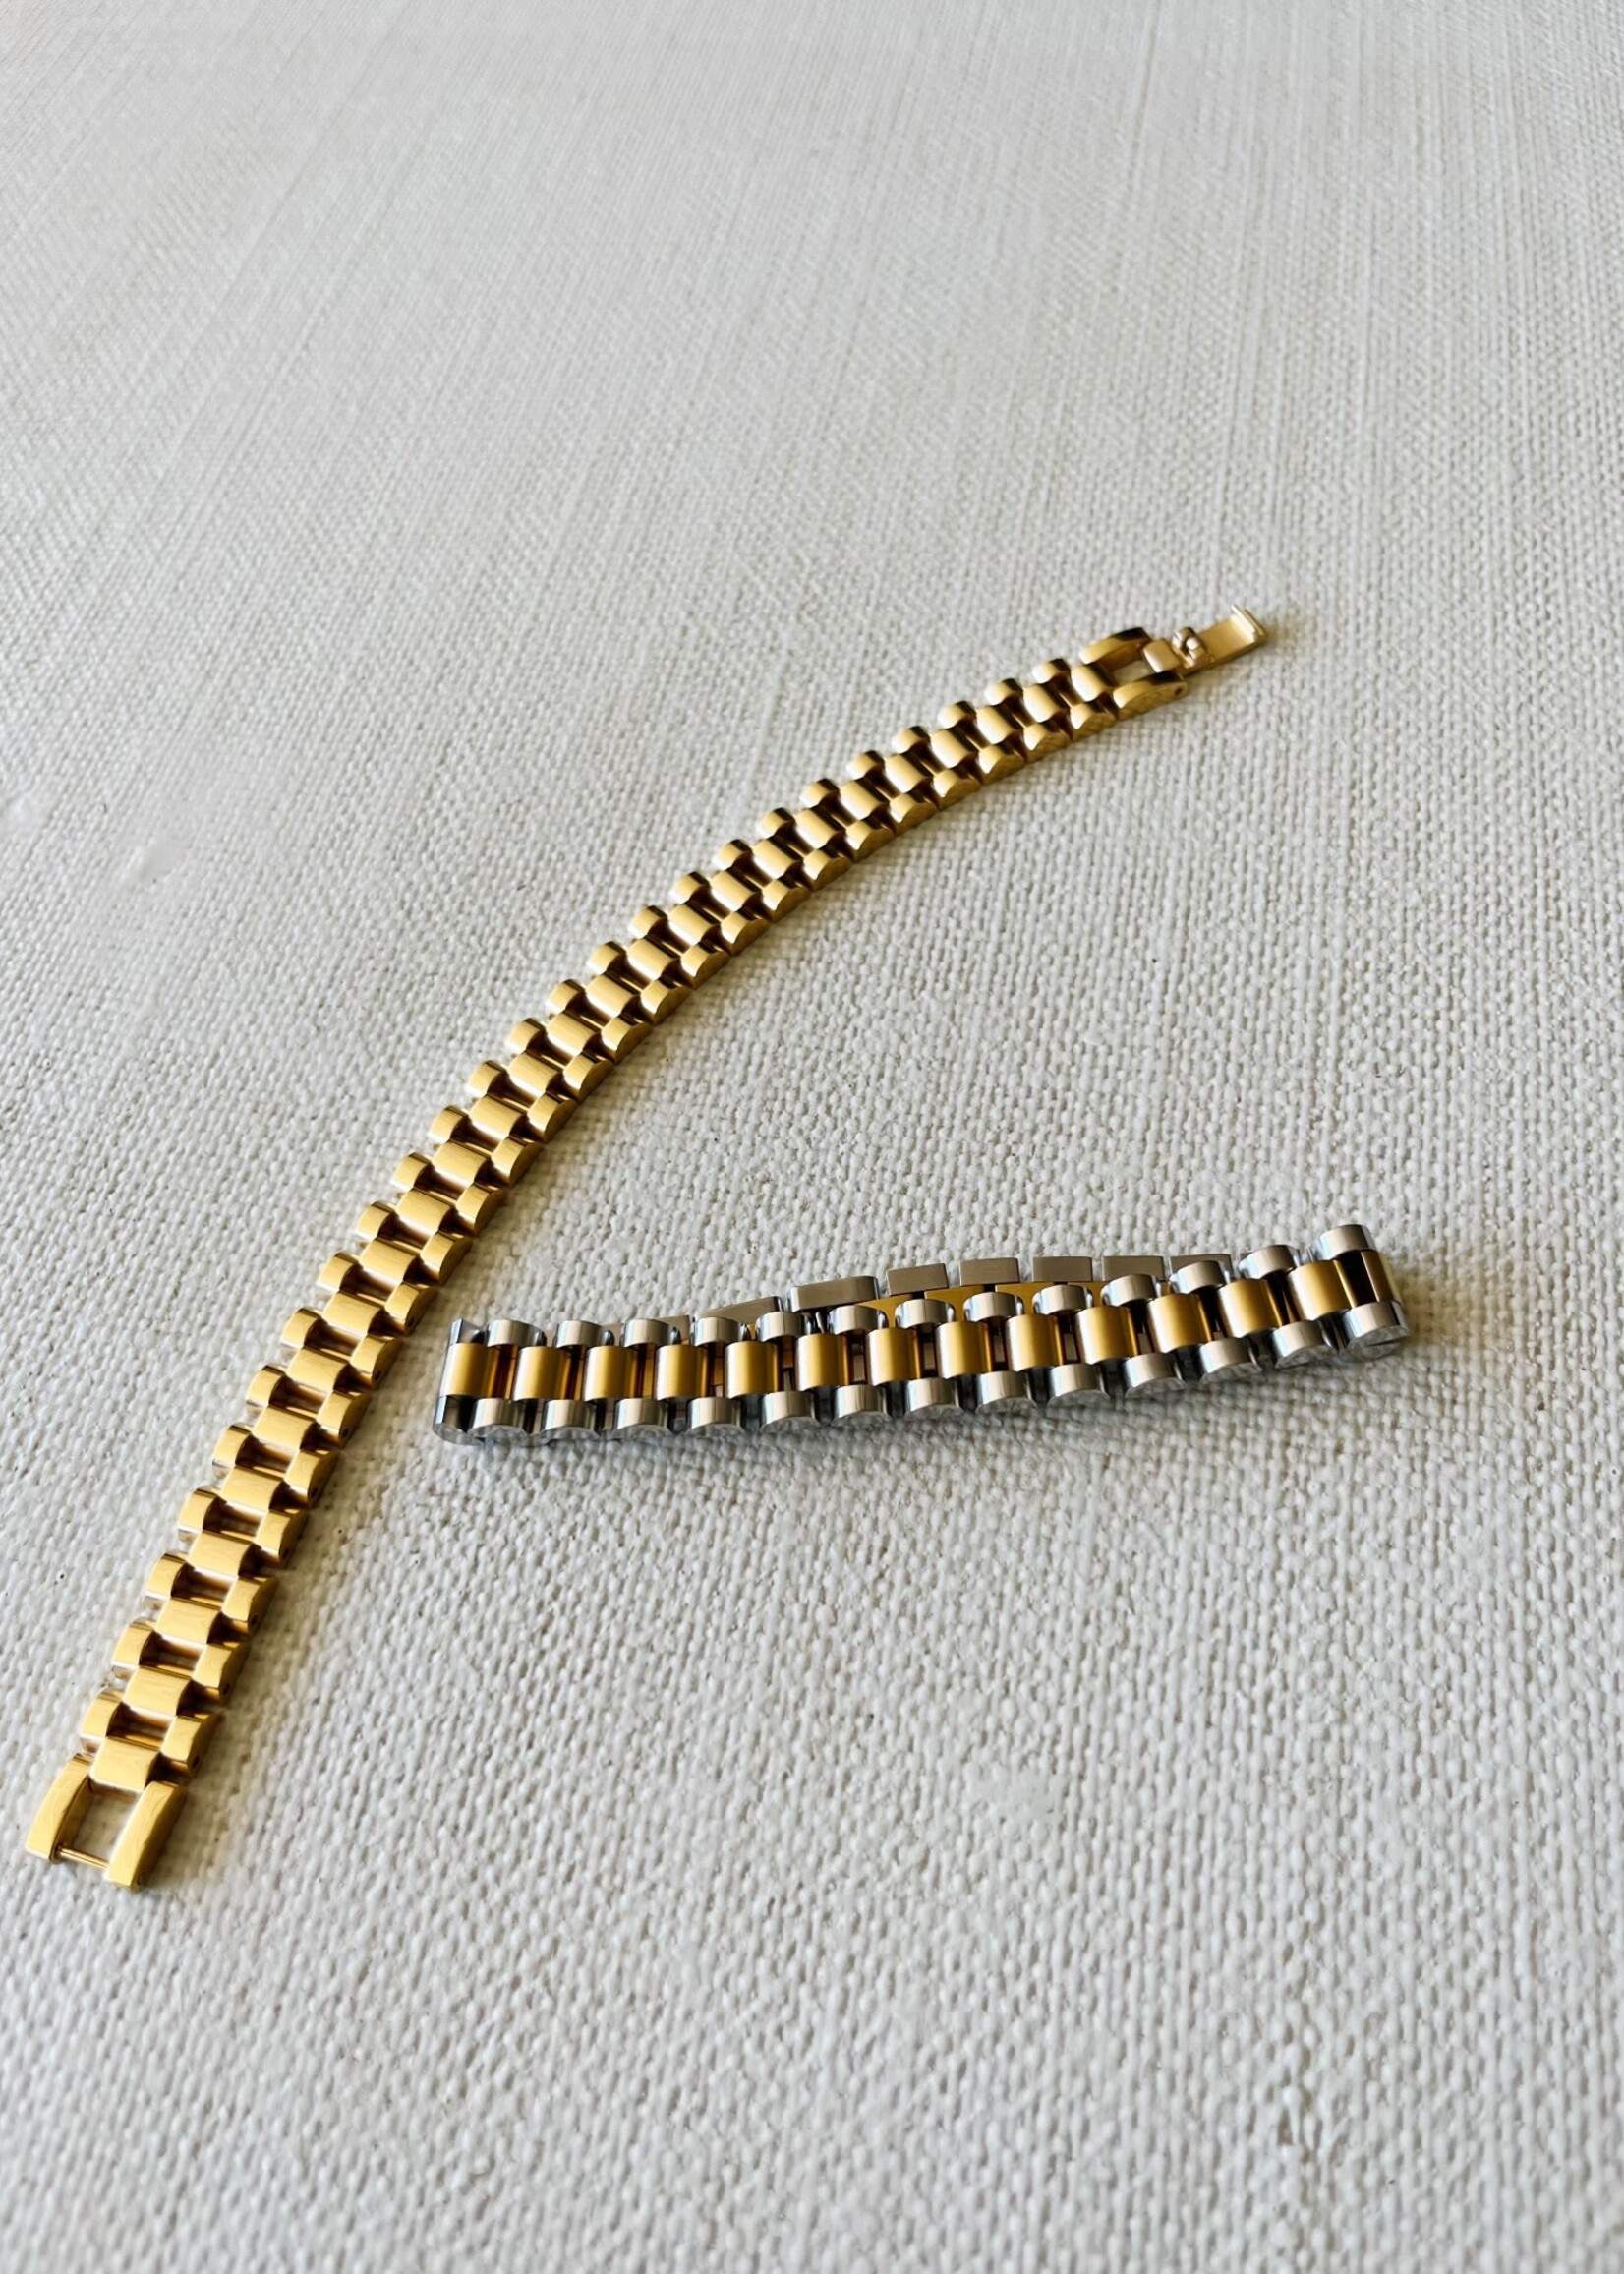 Bloom and Company Gold Watch Band Bracelet